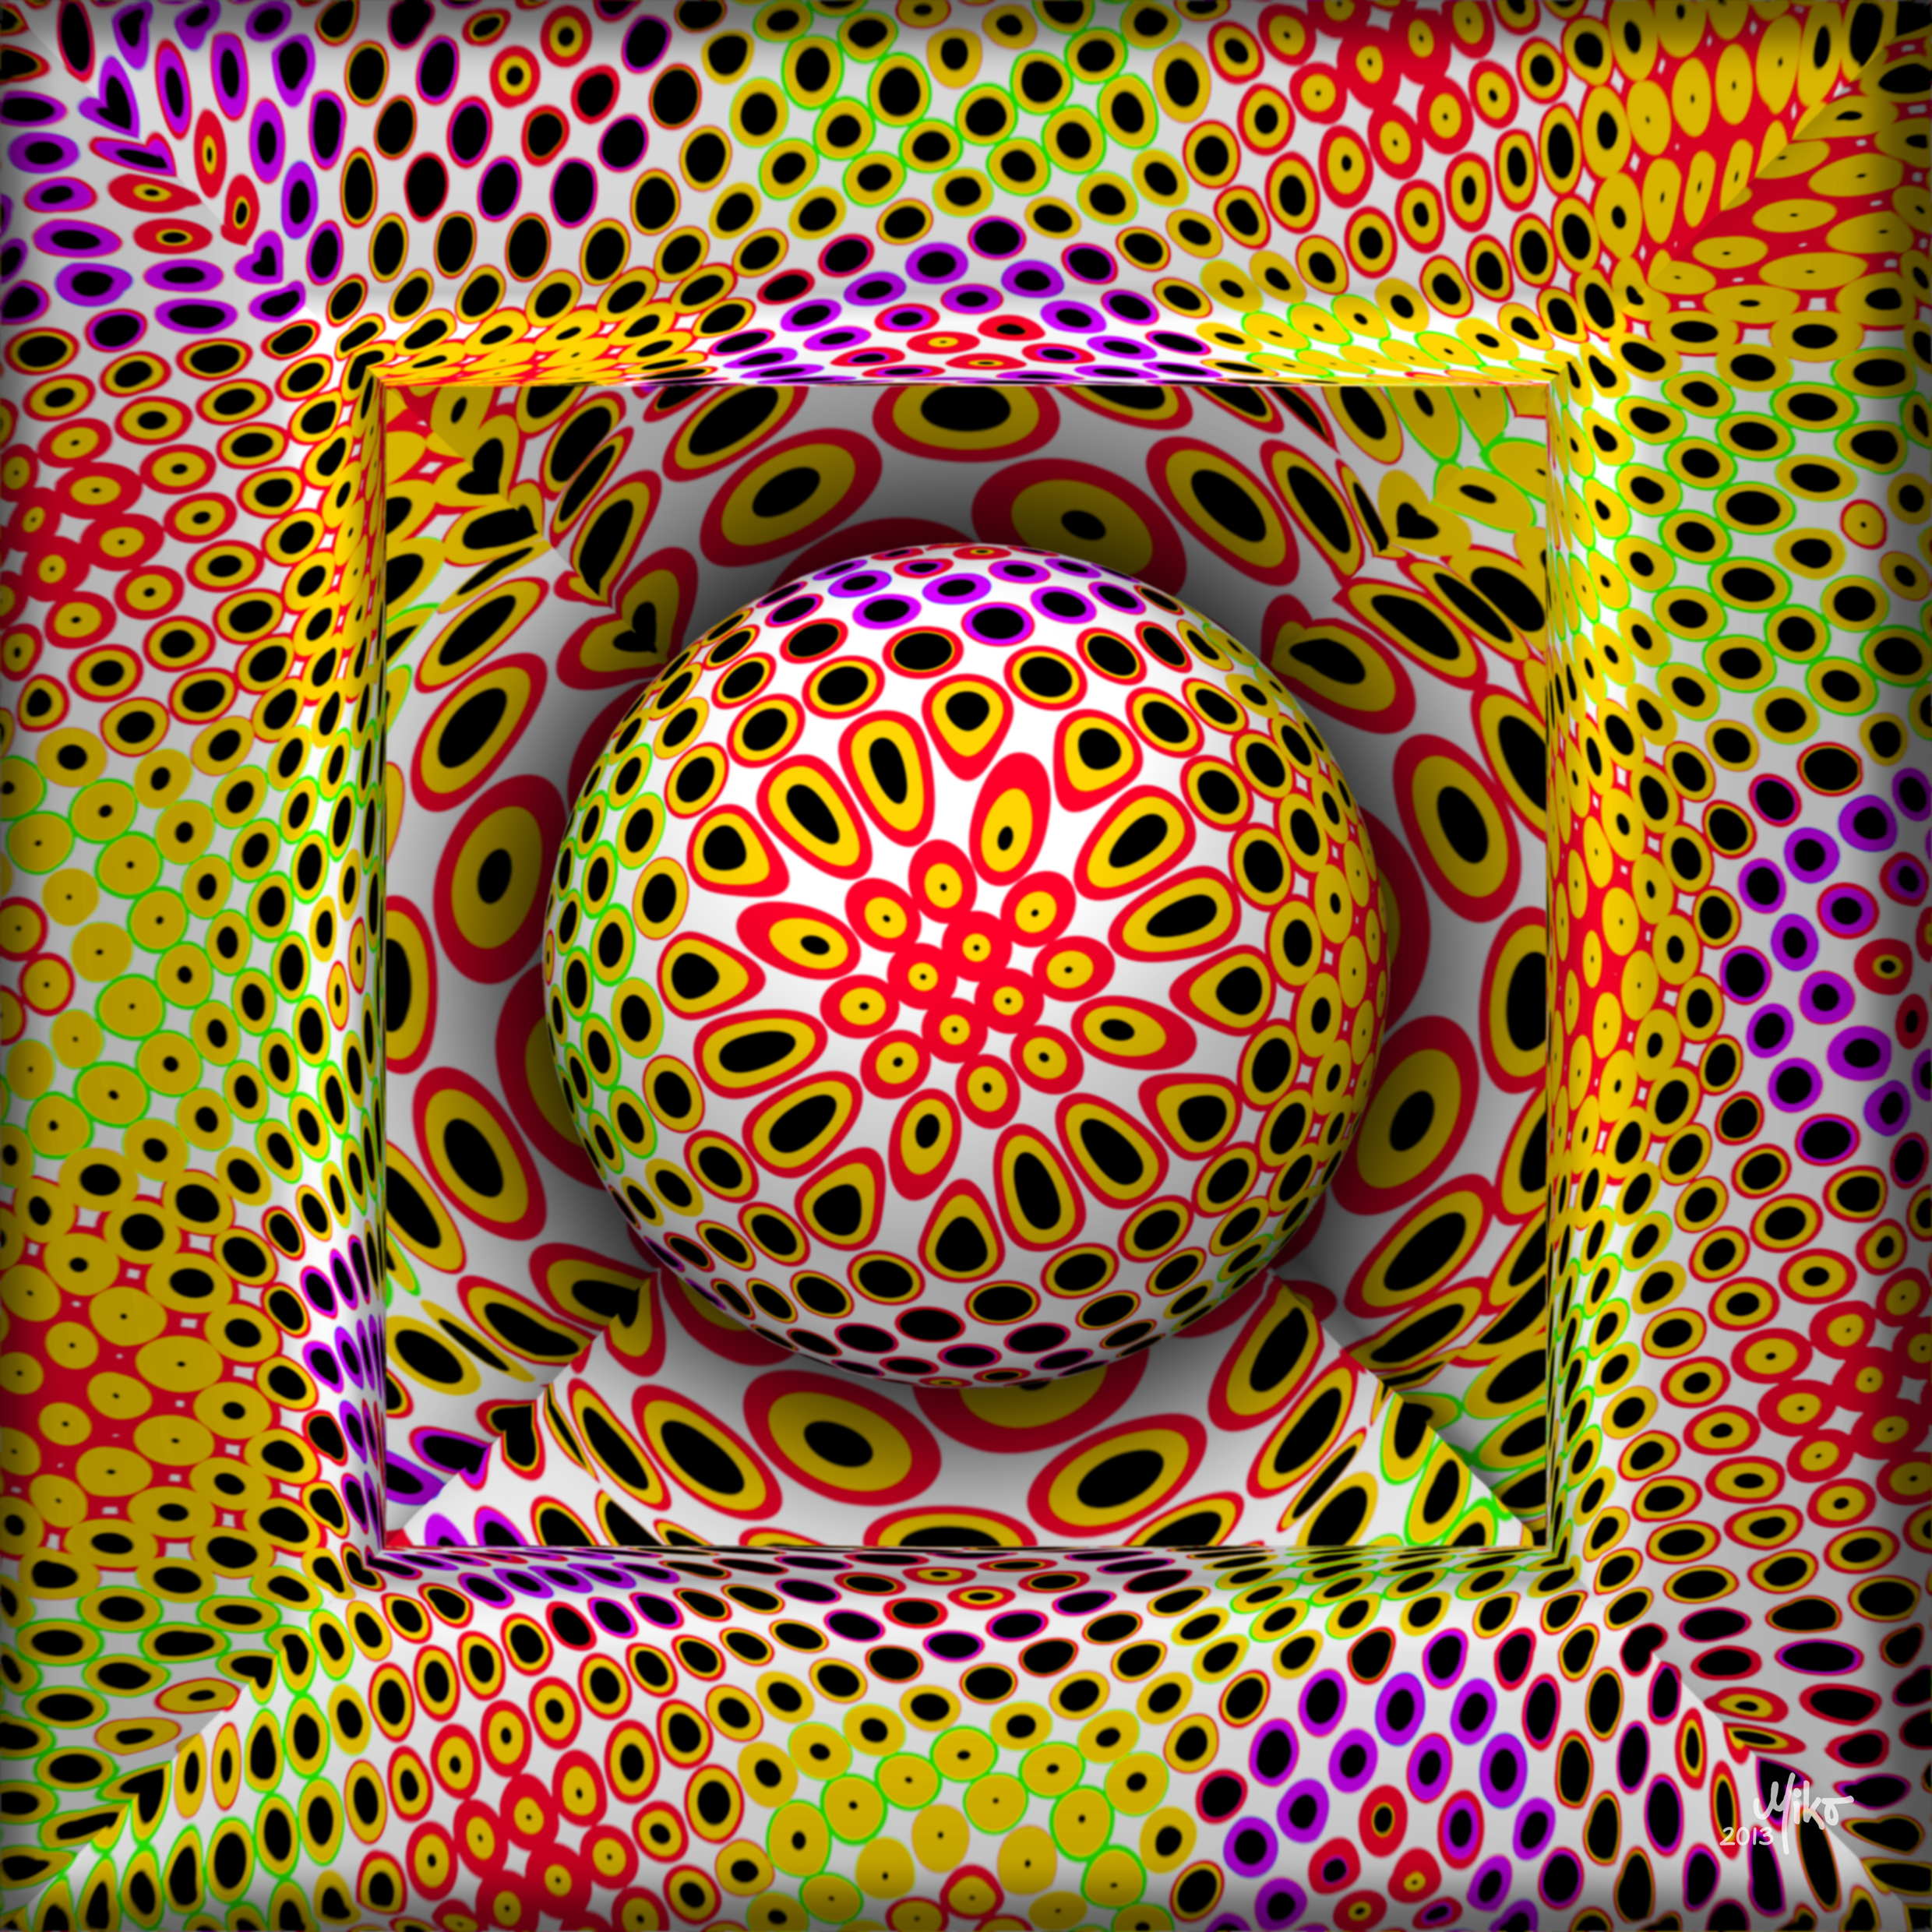 Miko-Art ""Ball In A Hole 0072 2013"" (Digital-Physical Painting) 80x80cm.